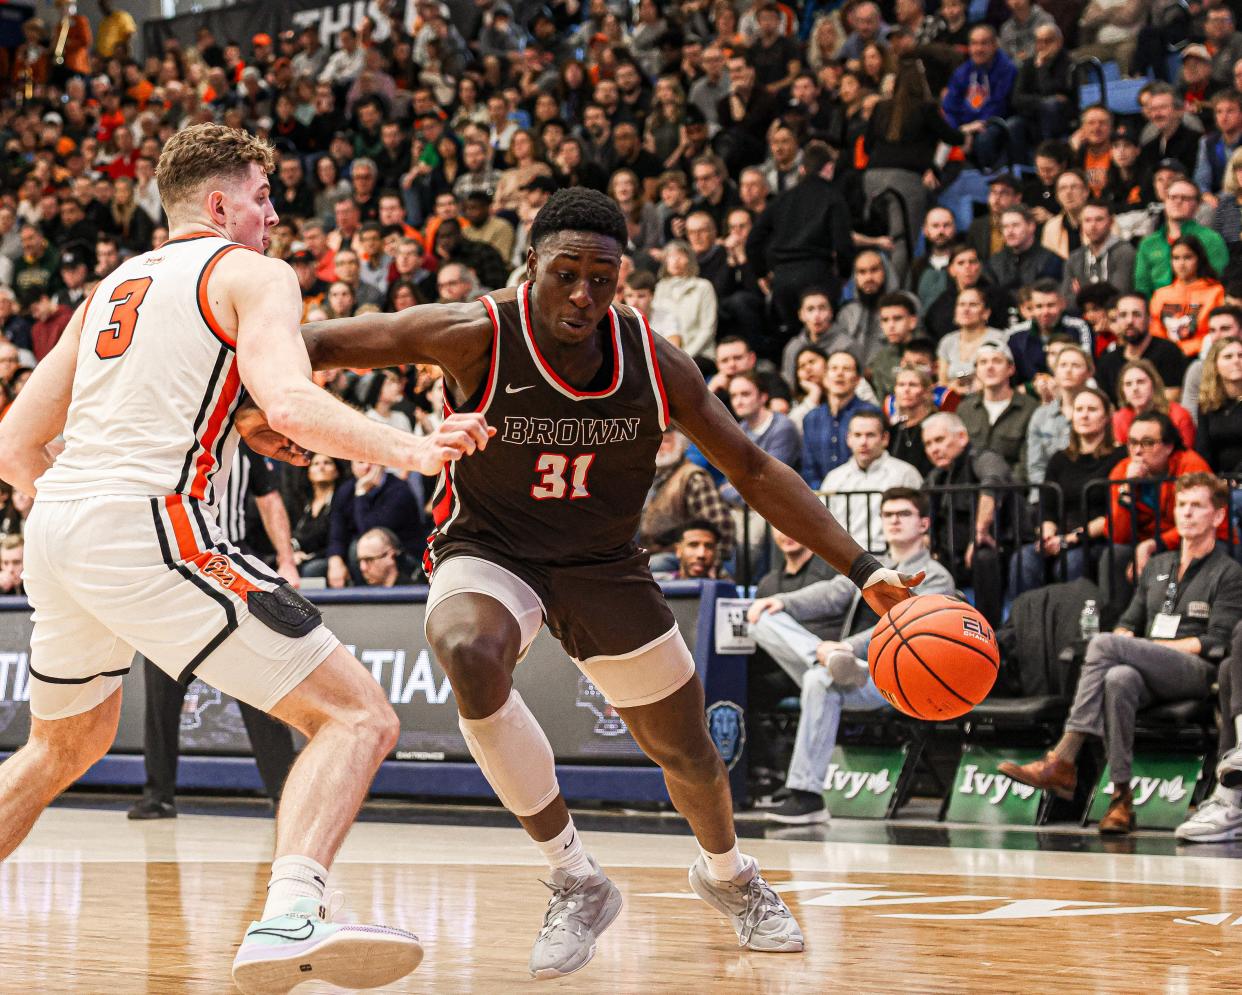 Brown's Nana Owusu-Anane pushes the ball against a Princeton defender in the Ivy League semifinals Saturday morning in New York.